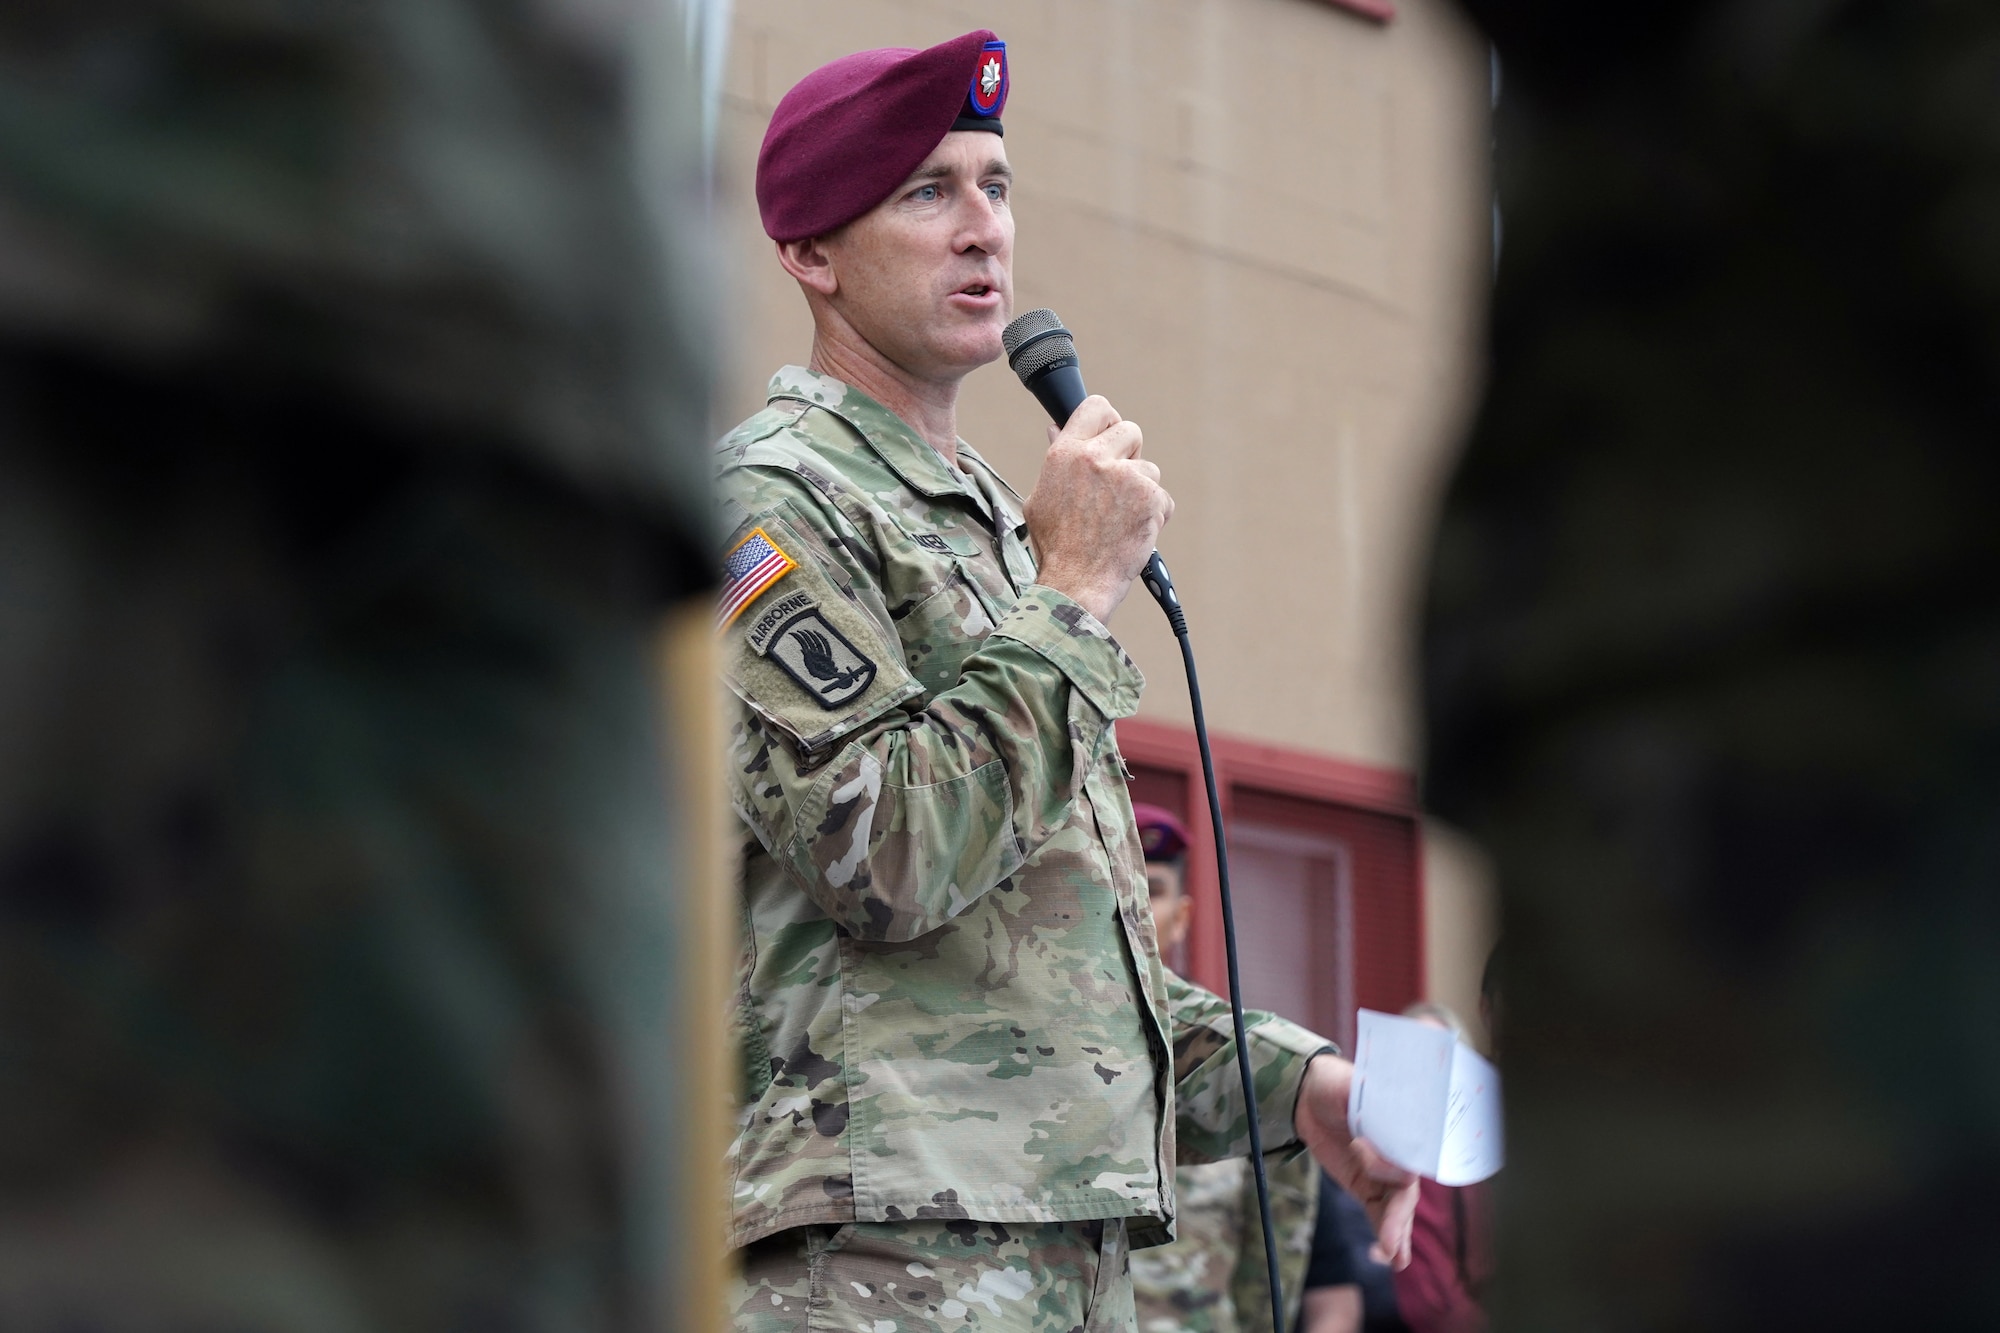 Army Lt. Col. Matt Myer speaks to his paratroopers assigned to the 1st Battalion, 501st Parachute Infantry Regiment, 4th Infantry Brigade Combat Team (Airborne), 25th Infantry Division, U.S. Army Alaska, veterans of the unit, dependents, and honored guests during ’Geronimo Week' festivities on Joint Base Elmendorf-Richardson, Alaska, Aug. 14, 2019, celebrating the unit's lineage. The regiment was activated on Nov. 15, 1942, at Camp Toccoa, Ga., served with distinction in World War II, the Cold War, Vietnam, as well as the Global War on Terror and continues to uphold the high standards expected of an airborne unit in peacetime duties and on the field of battle.